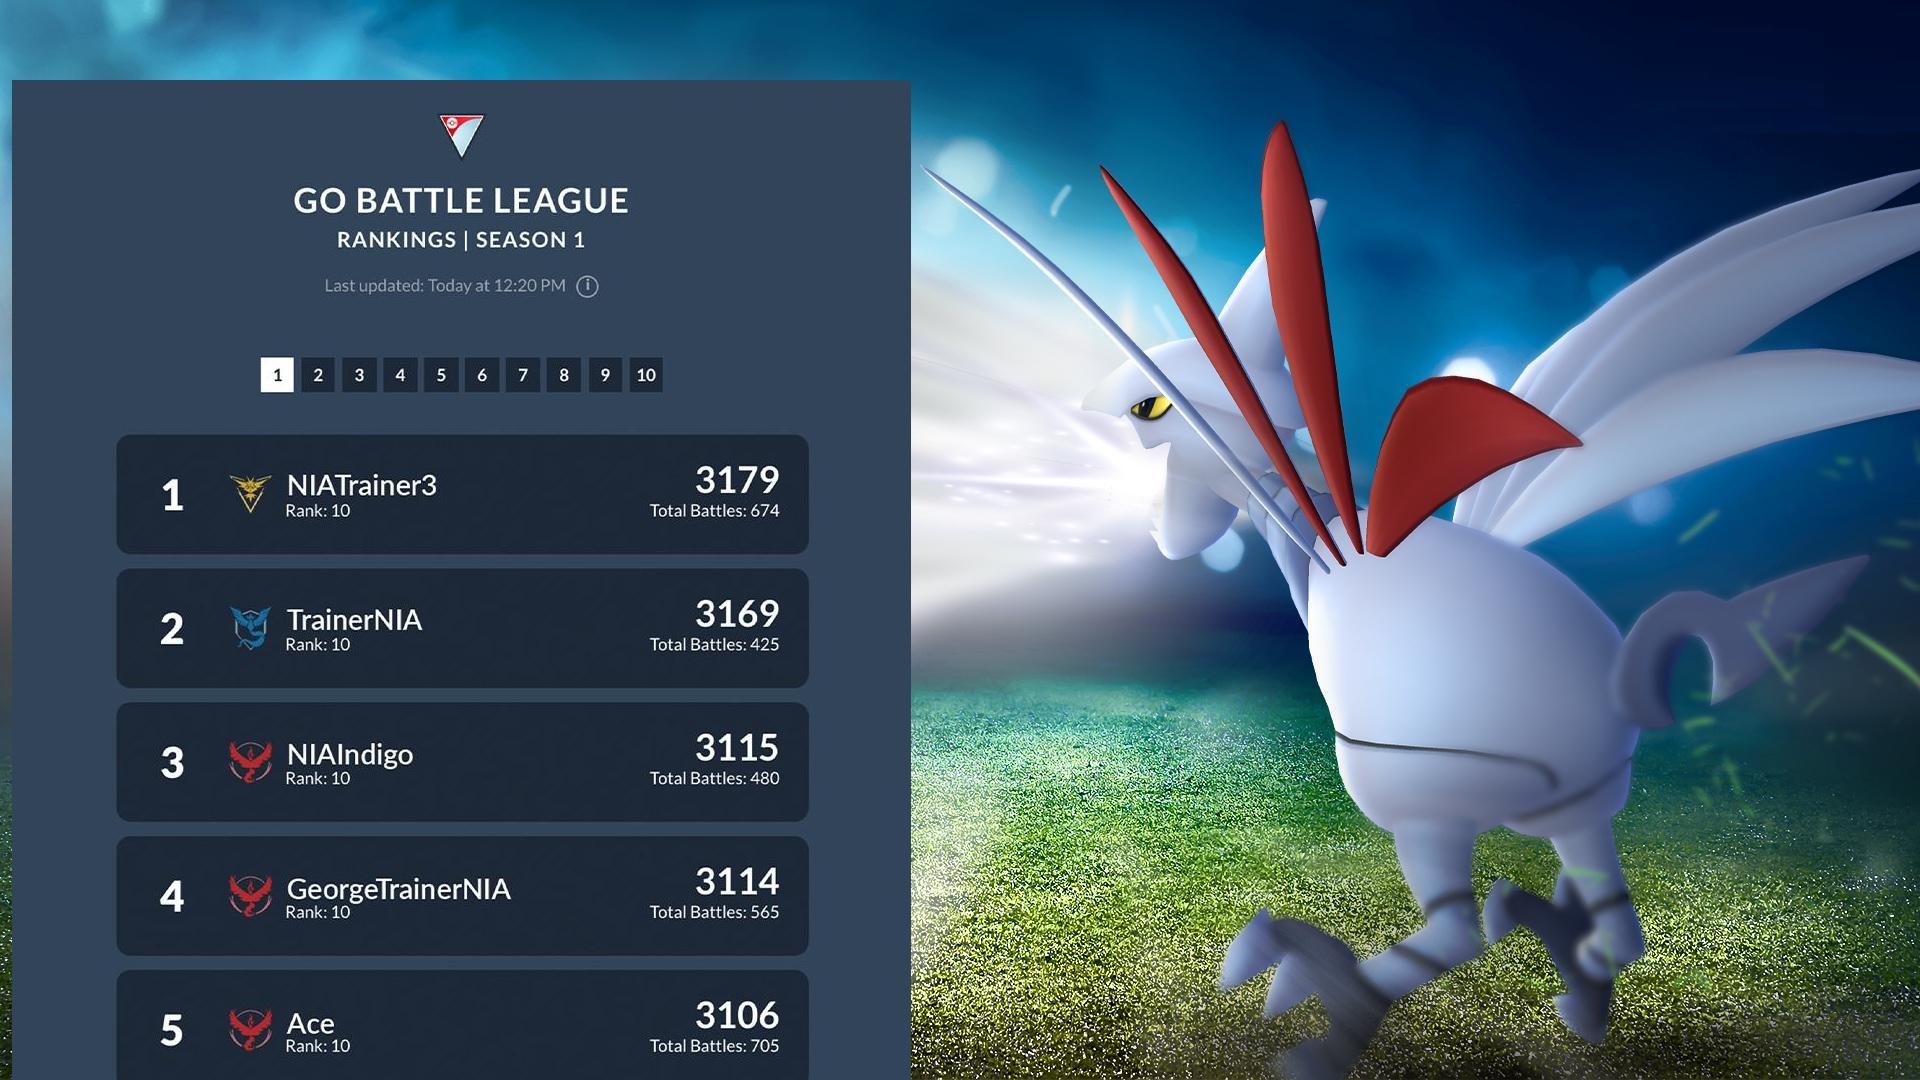 The Pokémon GO Battle League Leaderboard Shows No One At Rank 10